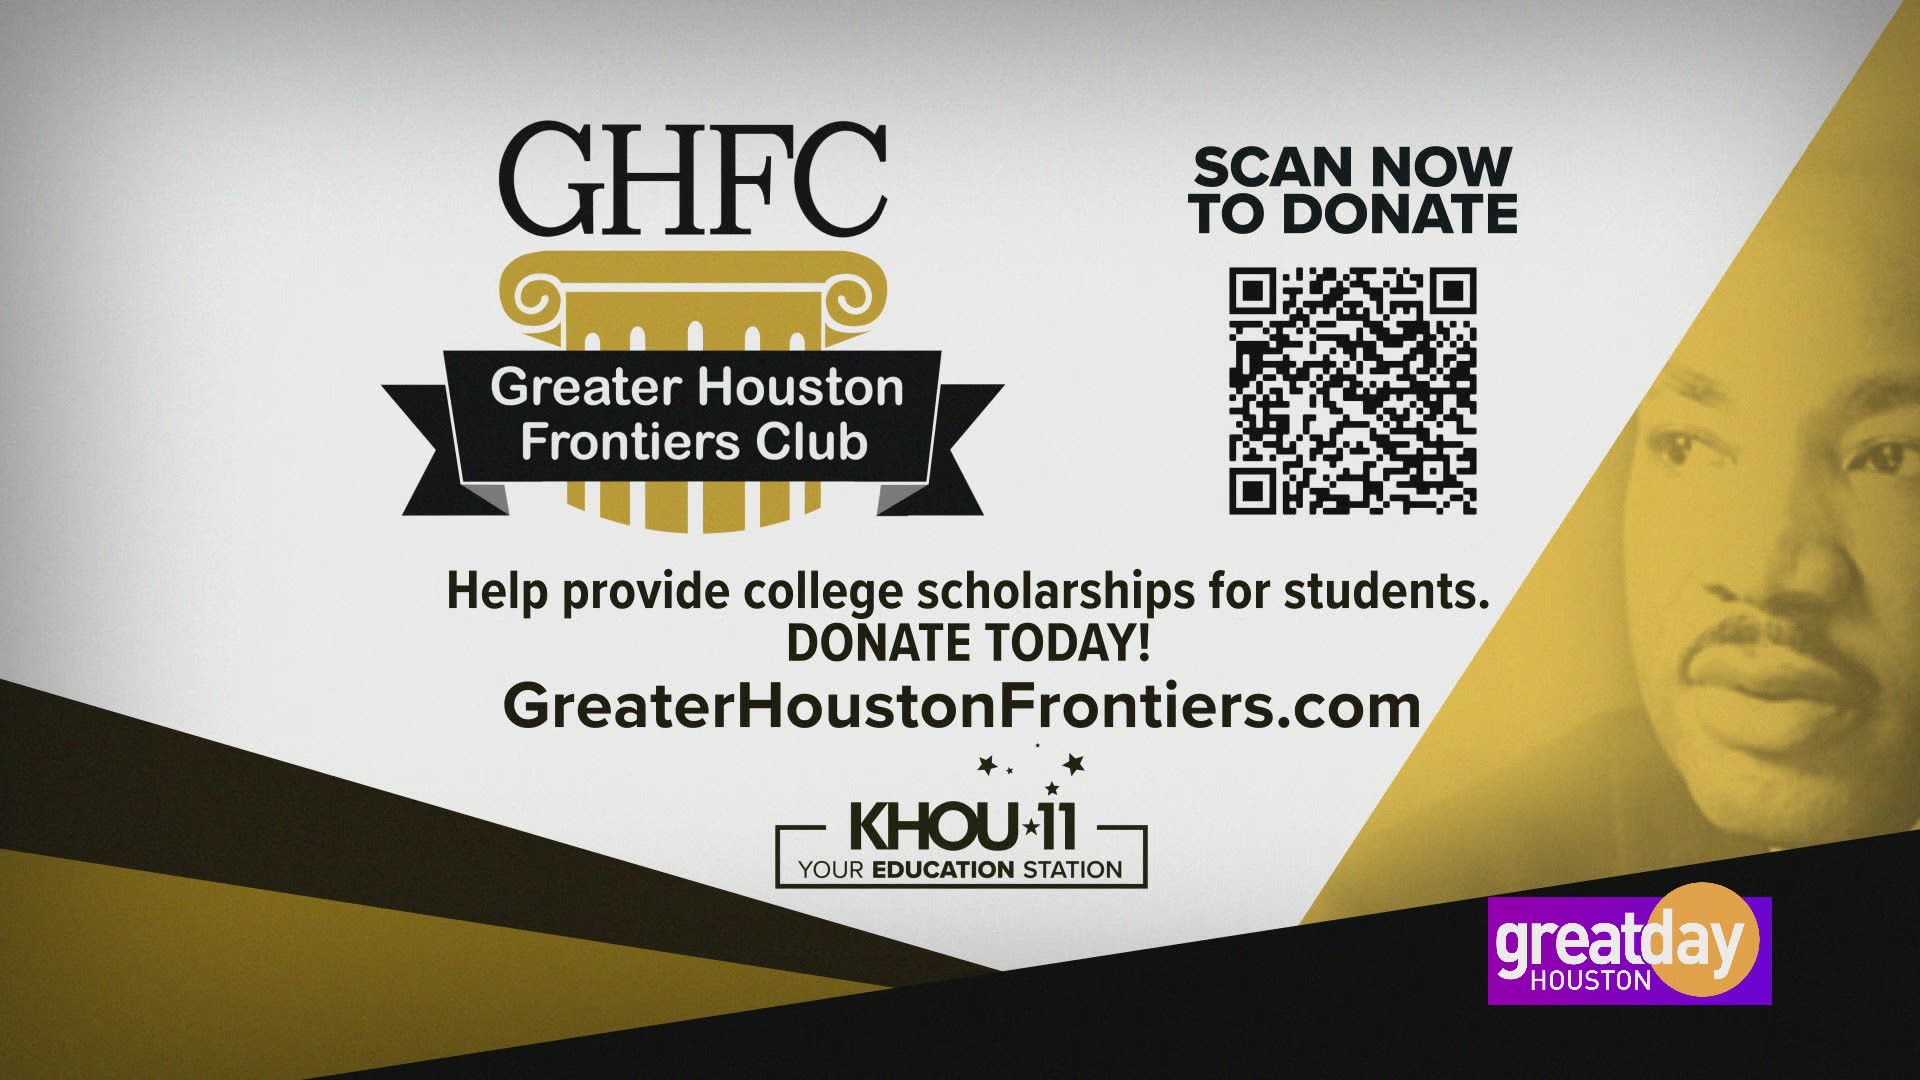 The Greater Houston Frontiers Club is hosting a virtual Dr. Martin Luther King Jr. Memorial Scholarship Breakfast